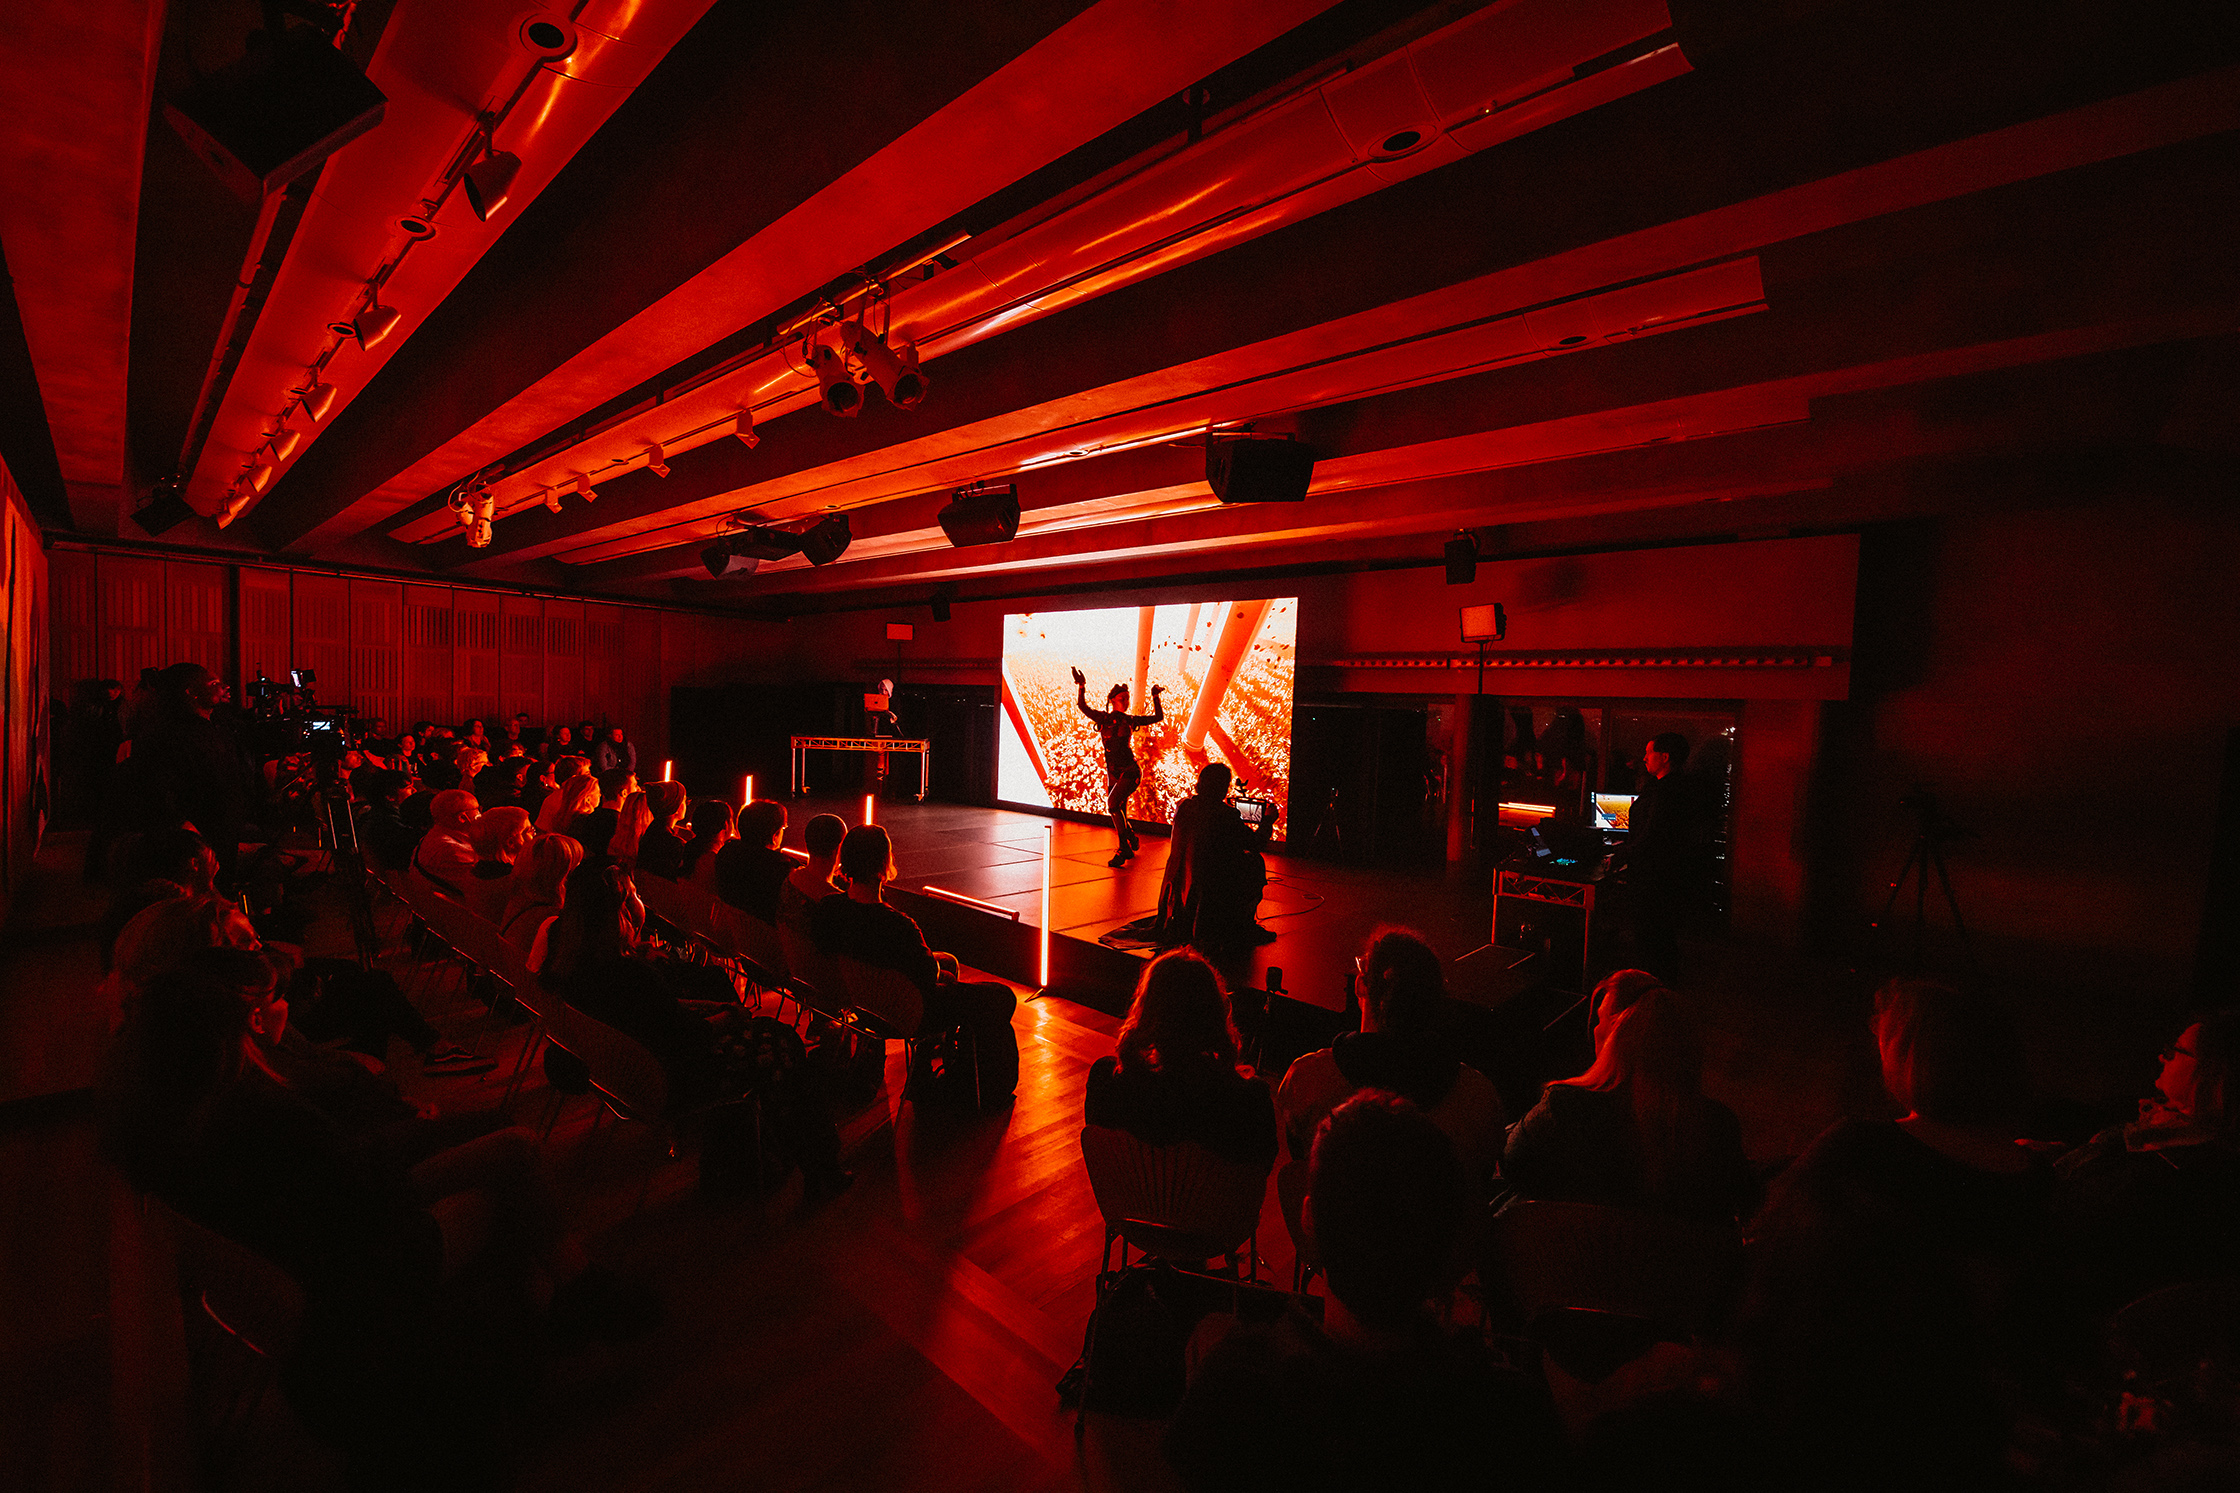 An audience watching a performer in front of a screen image under a dark red light